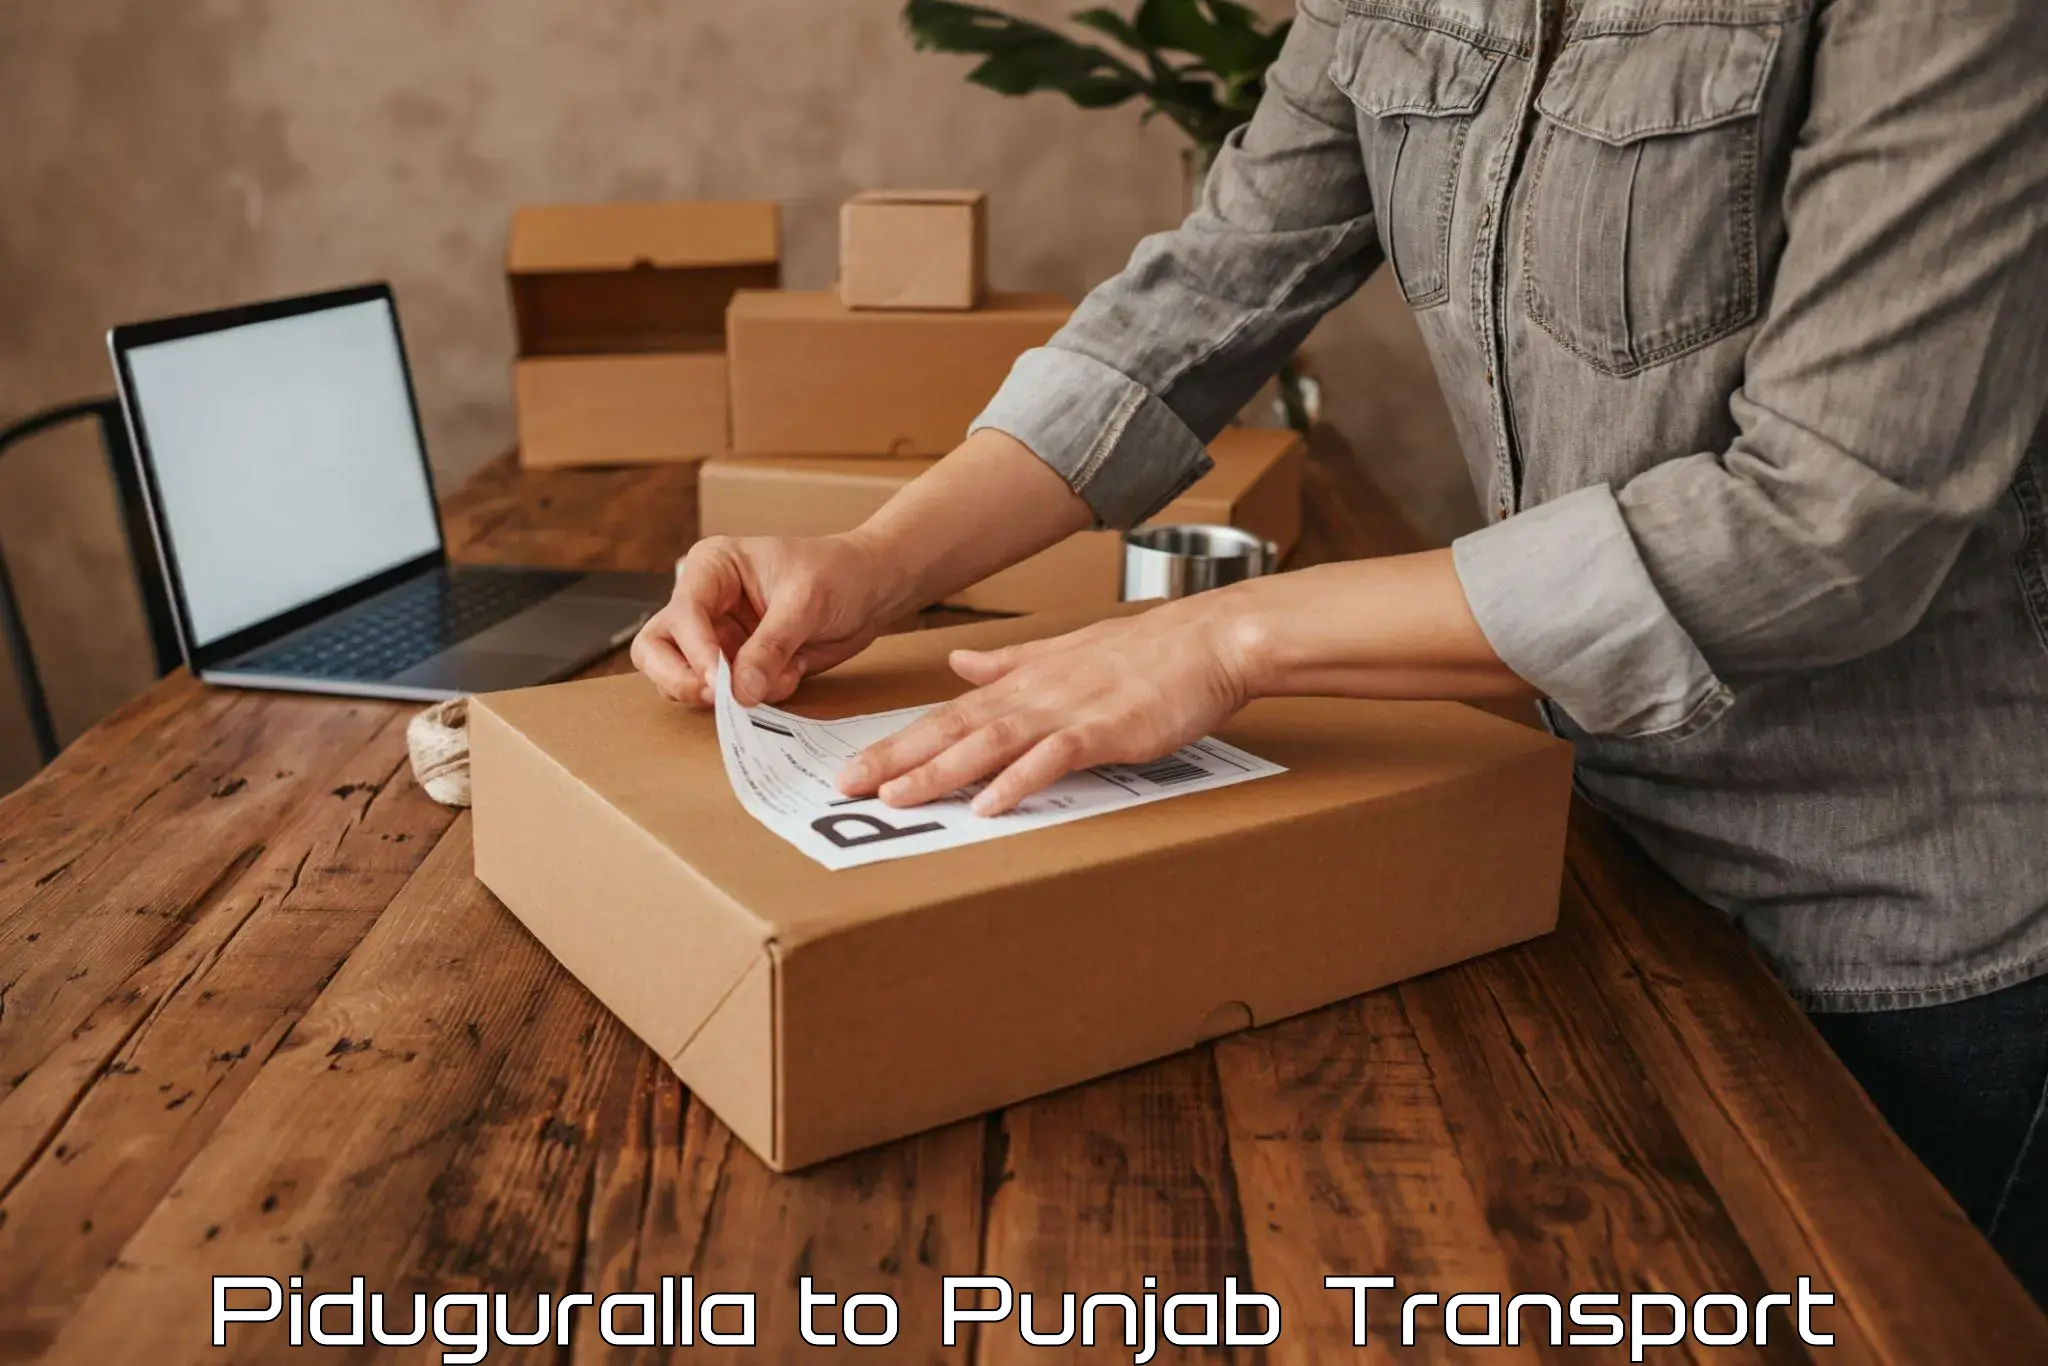 Best transport services in India Piduguralla to Punjab